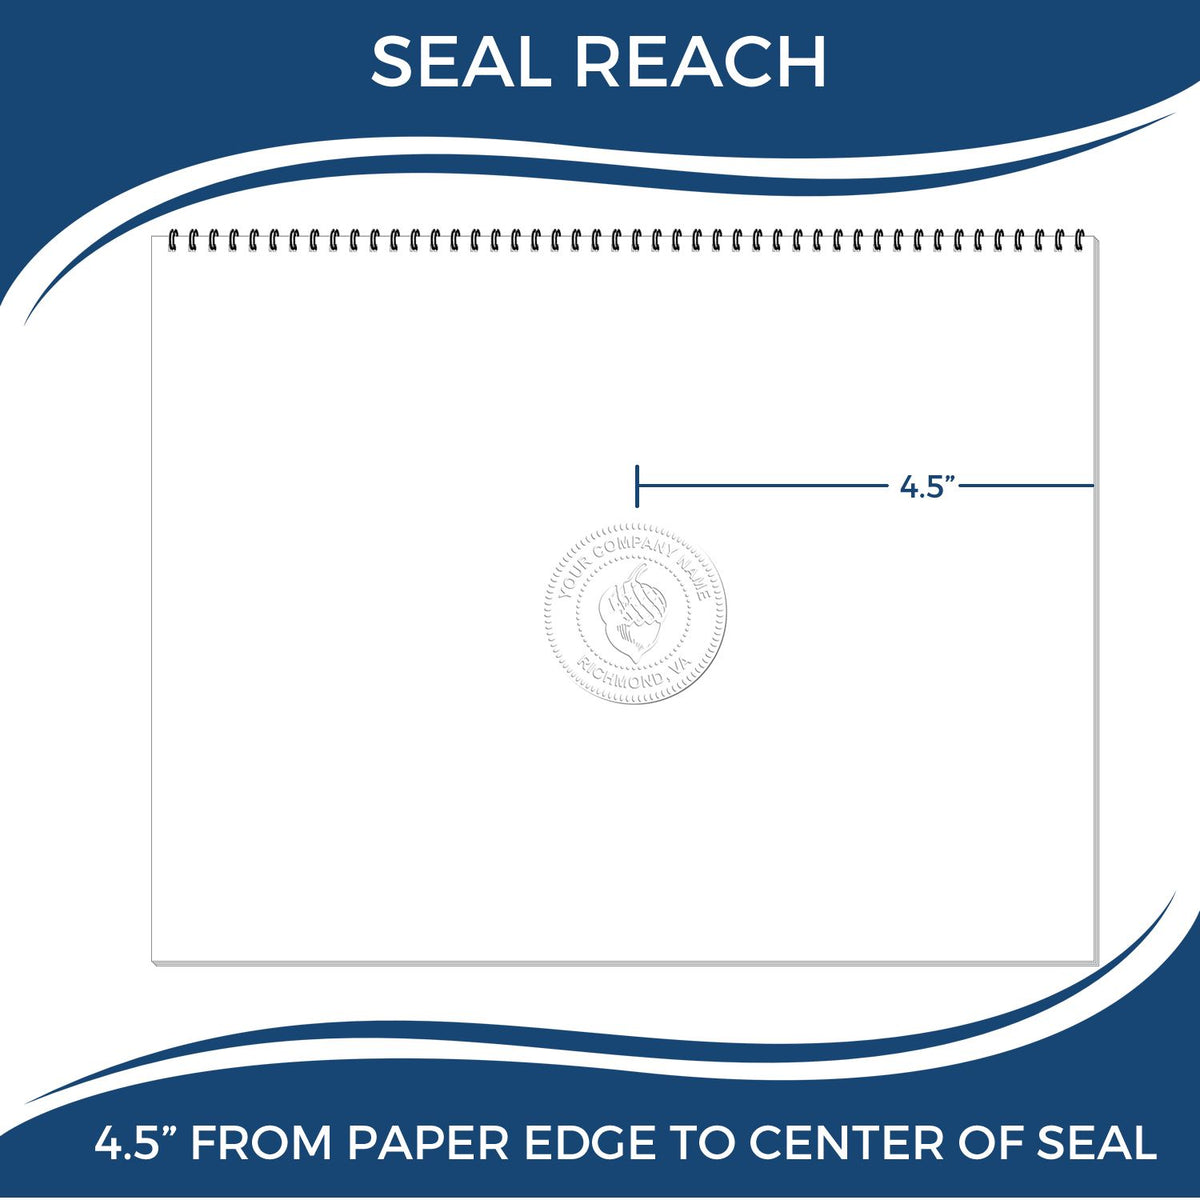 An infographic showing the seal reach which is represented by a ruler and a miniature seal image of the Extended Long Reach Georgia Architect Seal Embosser